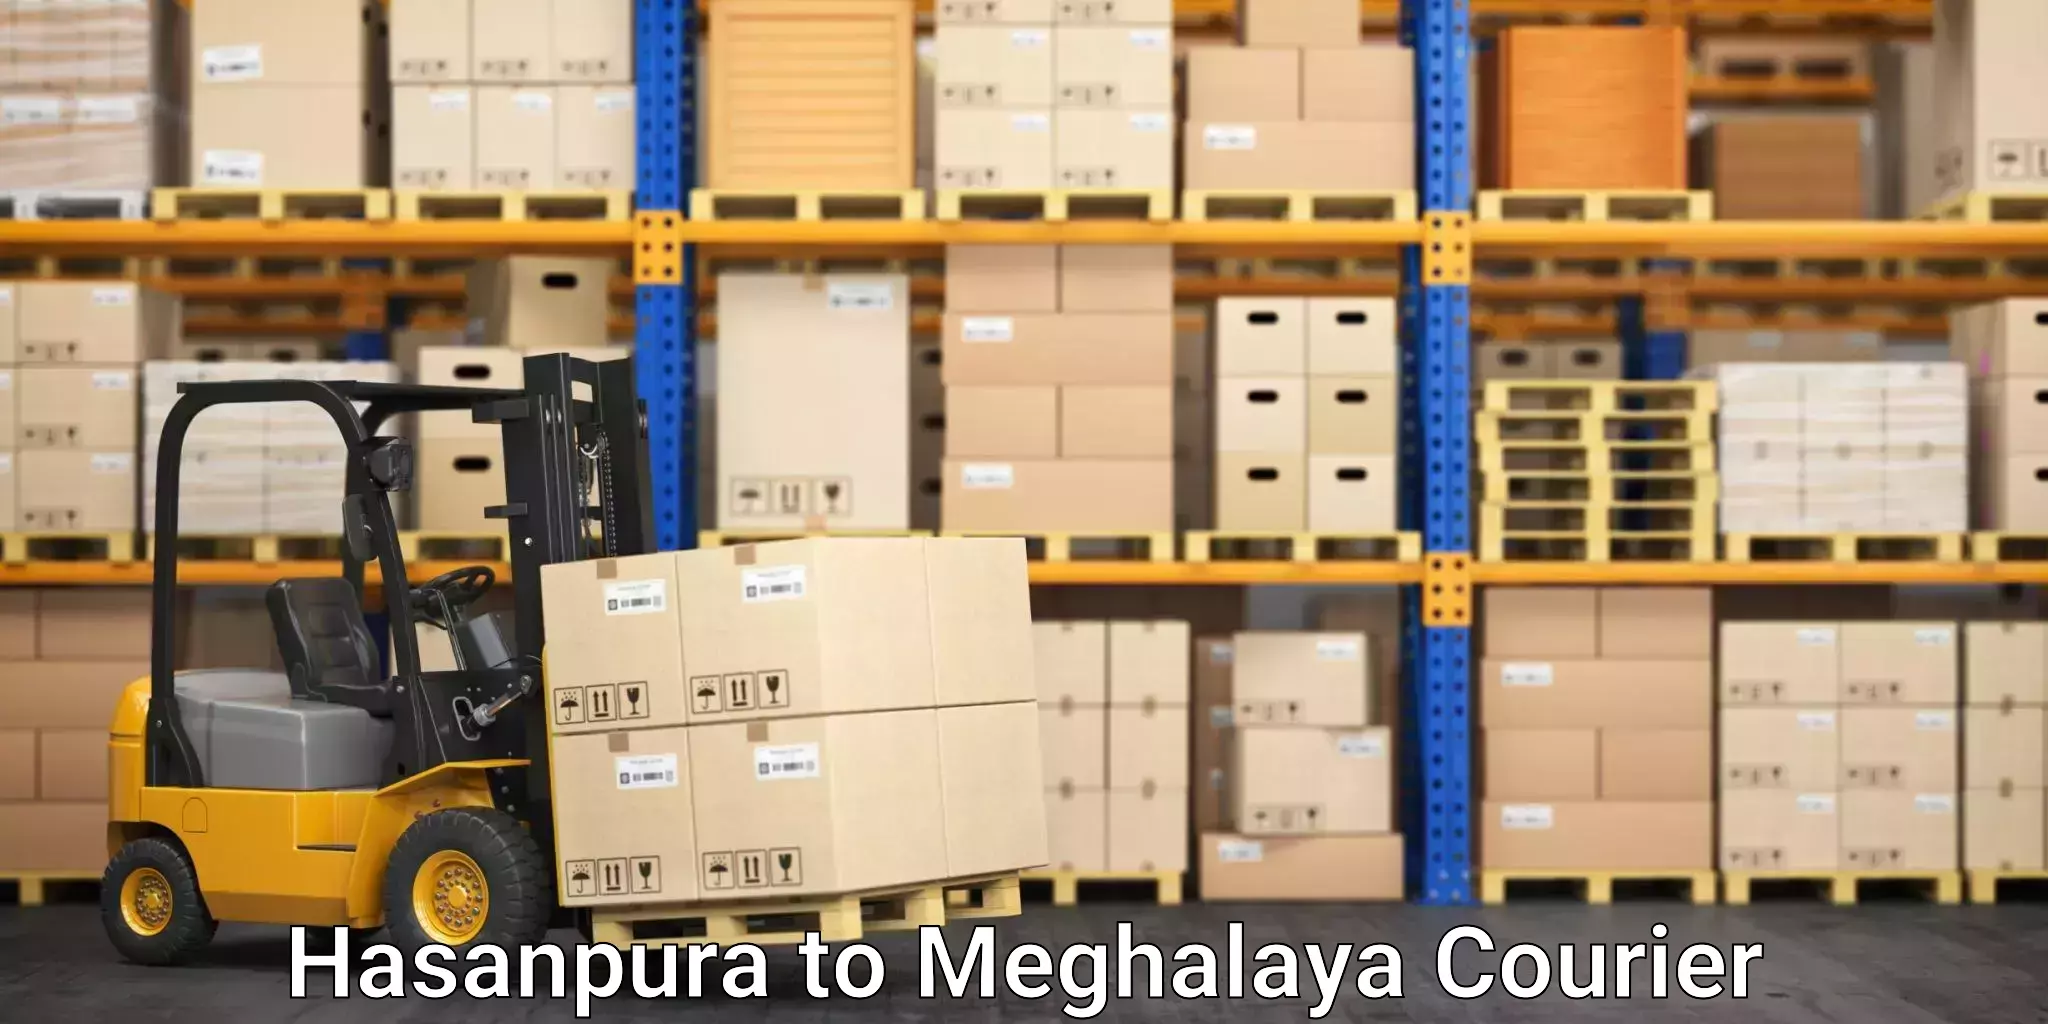 Reliable moving solutions Hasanpura to Meghalaya